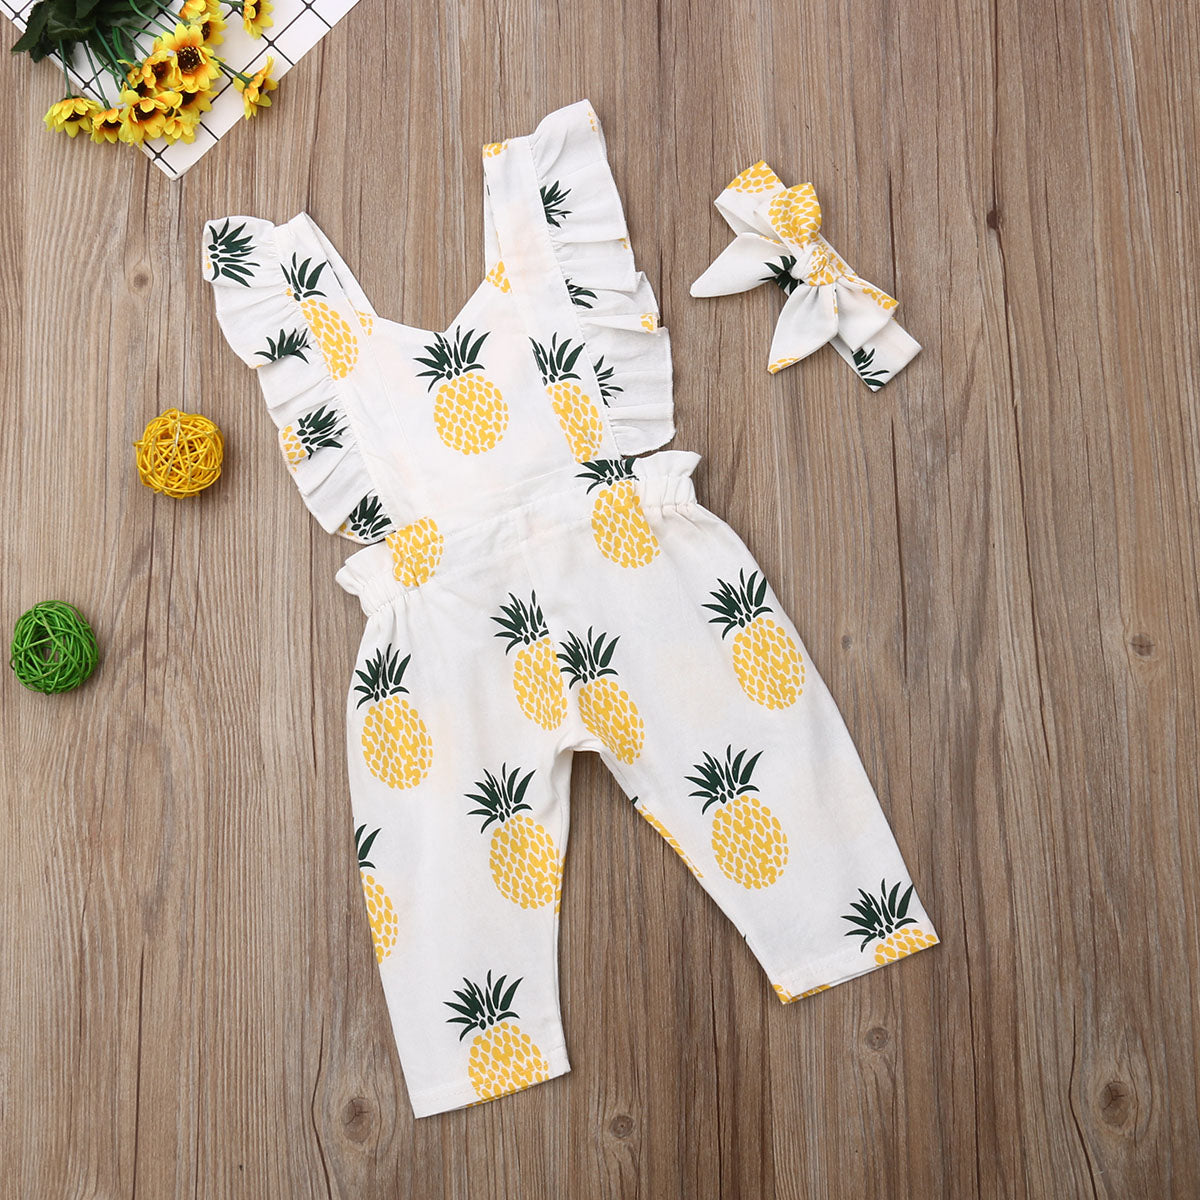 Pineapple Romper - Abby Apples Boutique